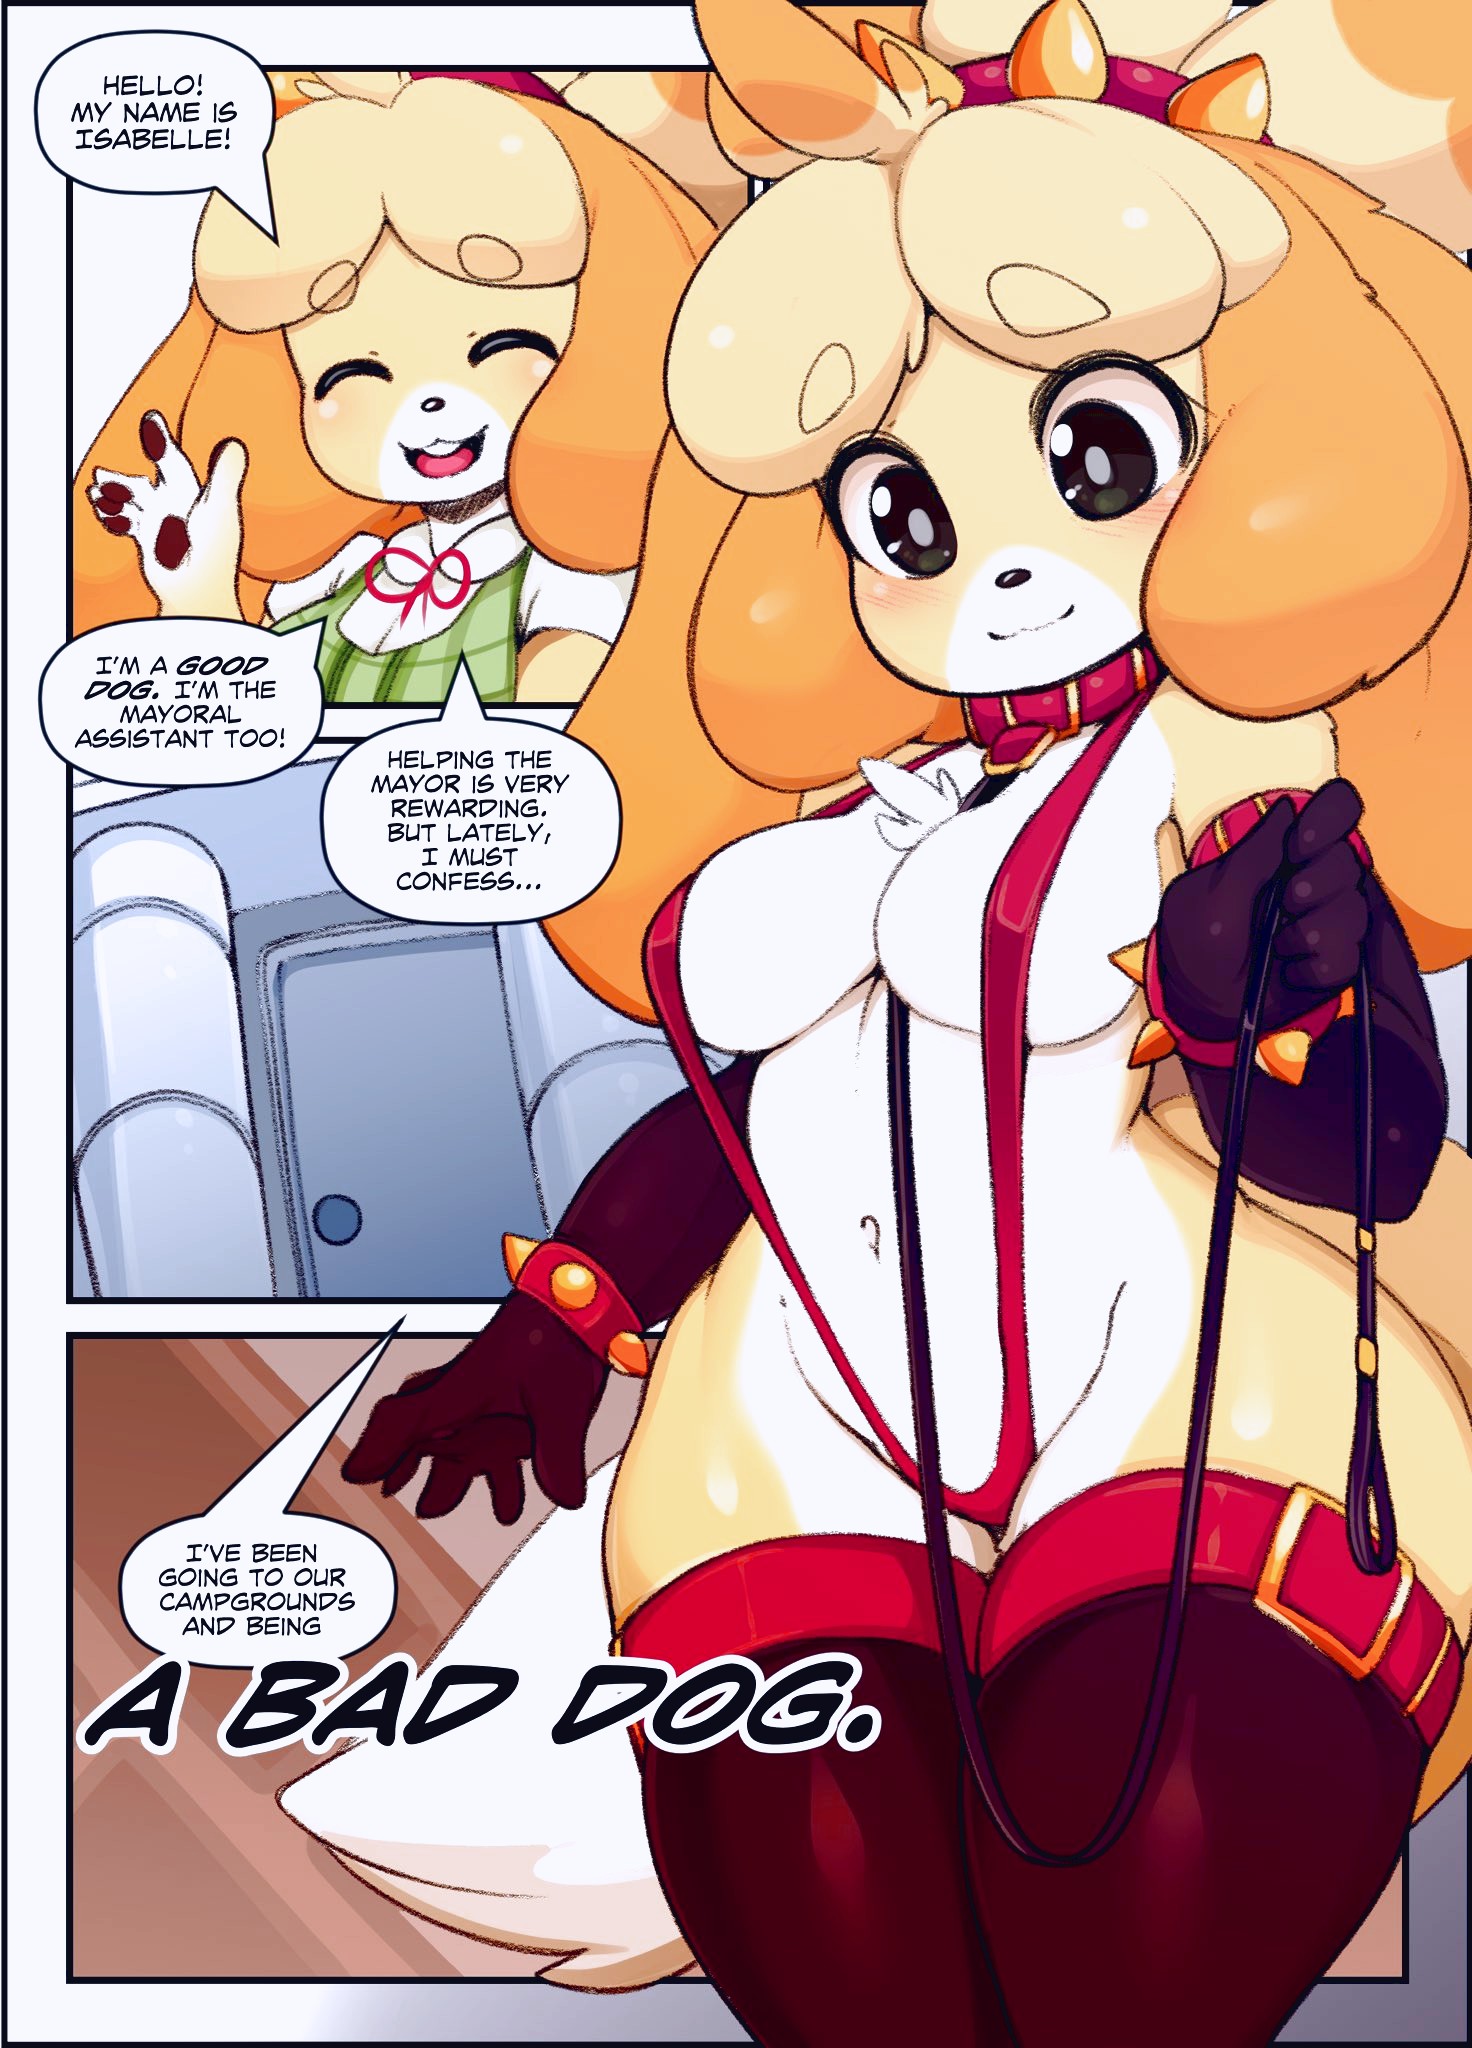 A Bad Dog porn comic page 01 on category Animal Crossing